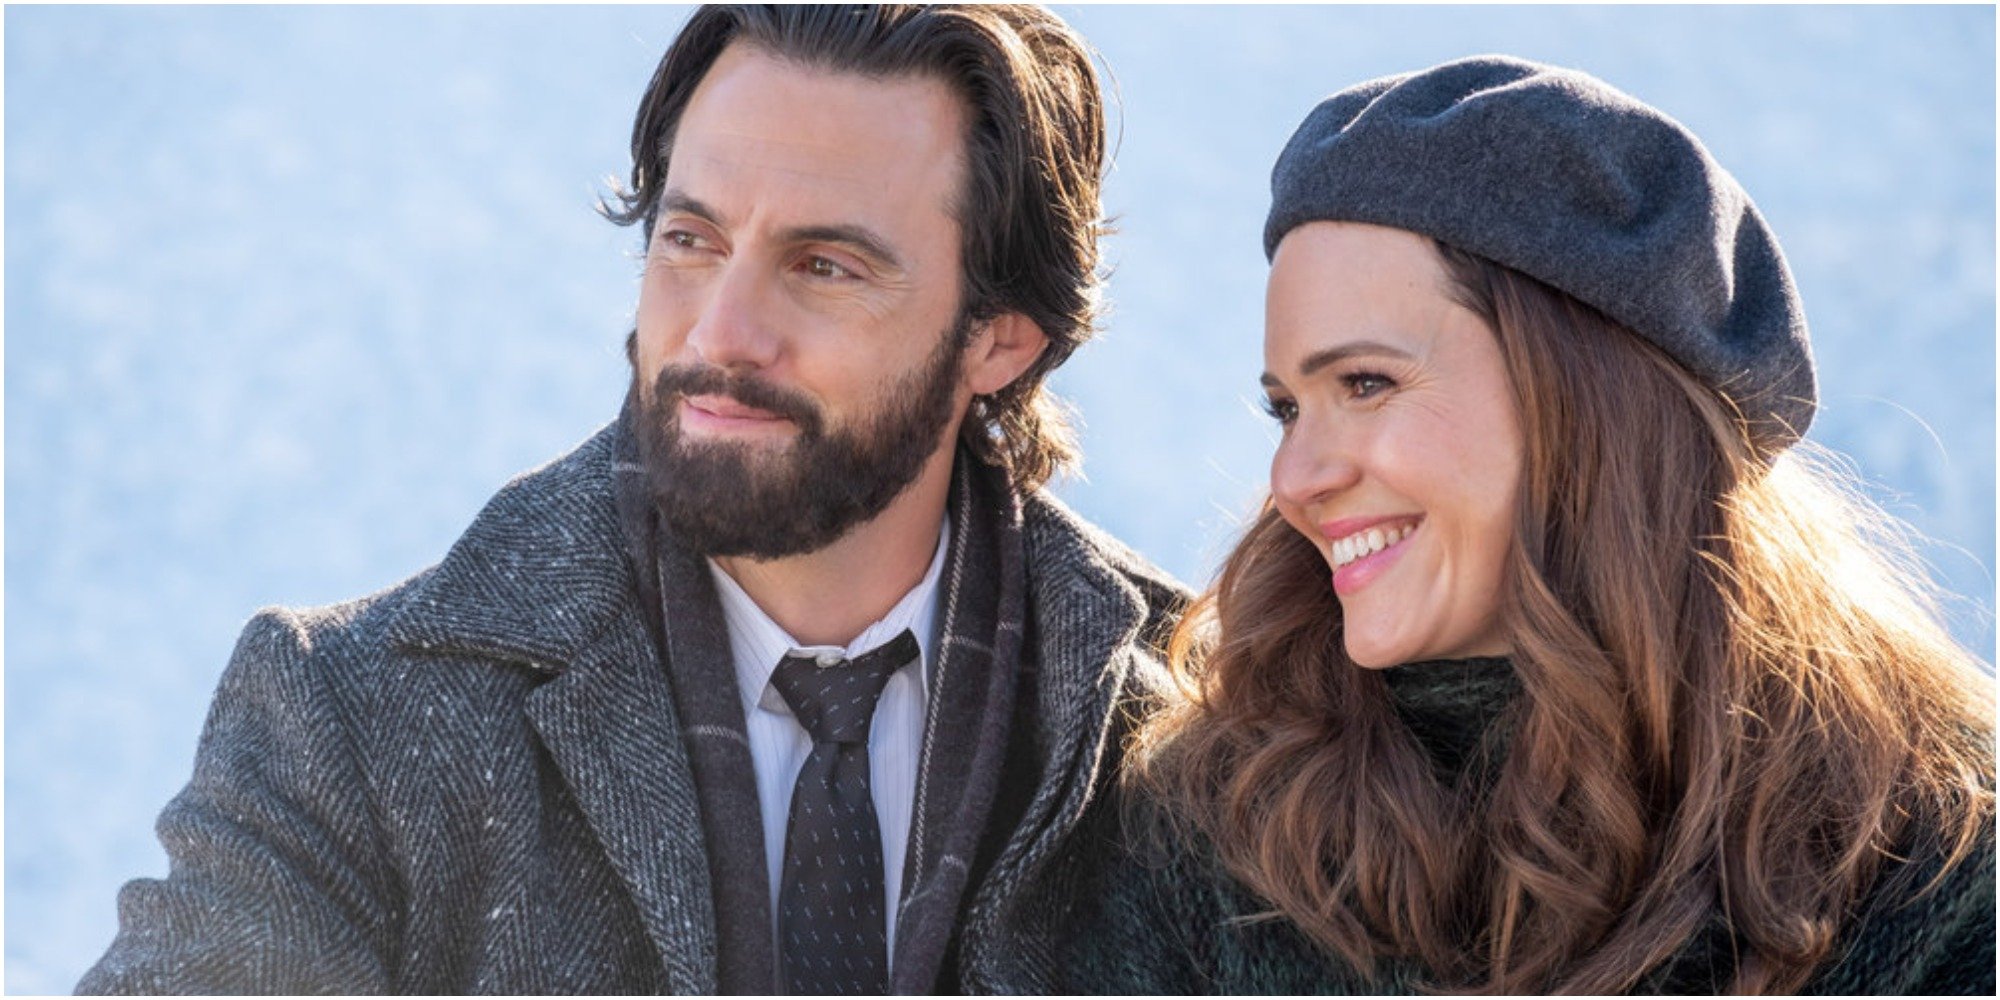 Milo Ventimiglia and Mandy Moore on the set of This Is Us.